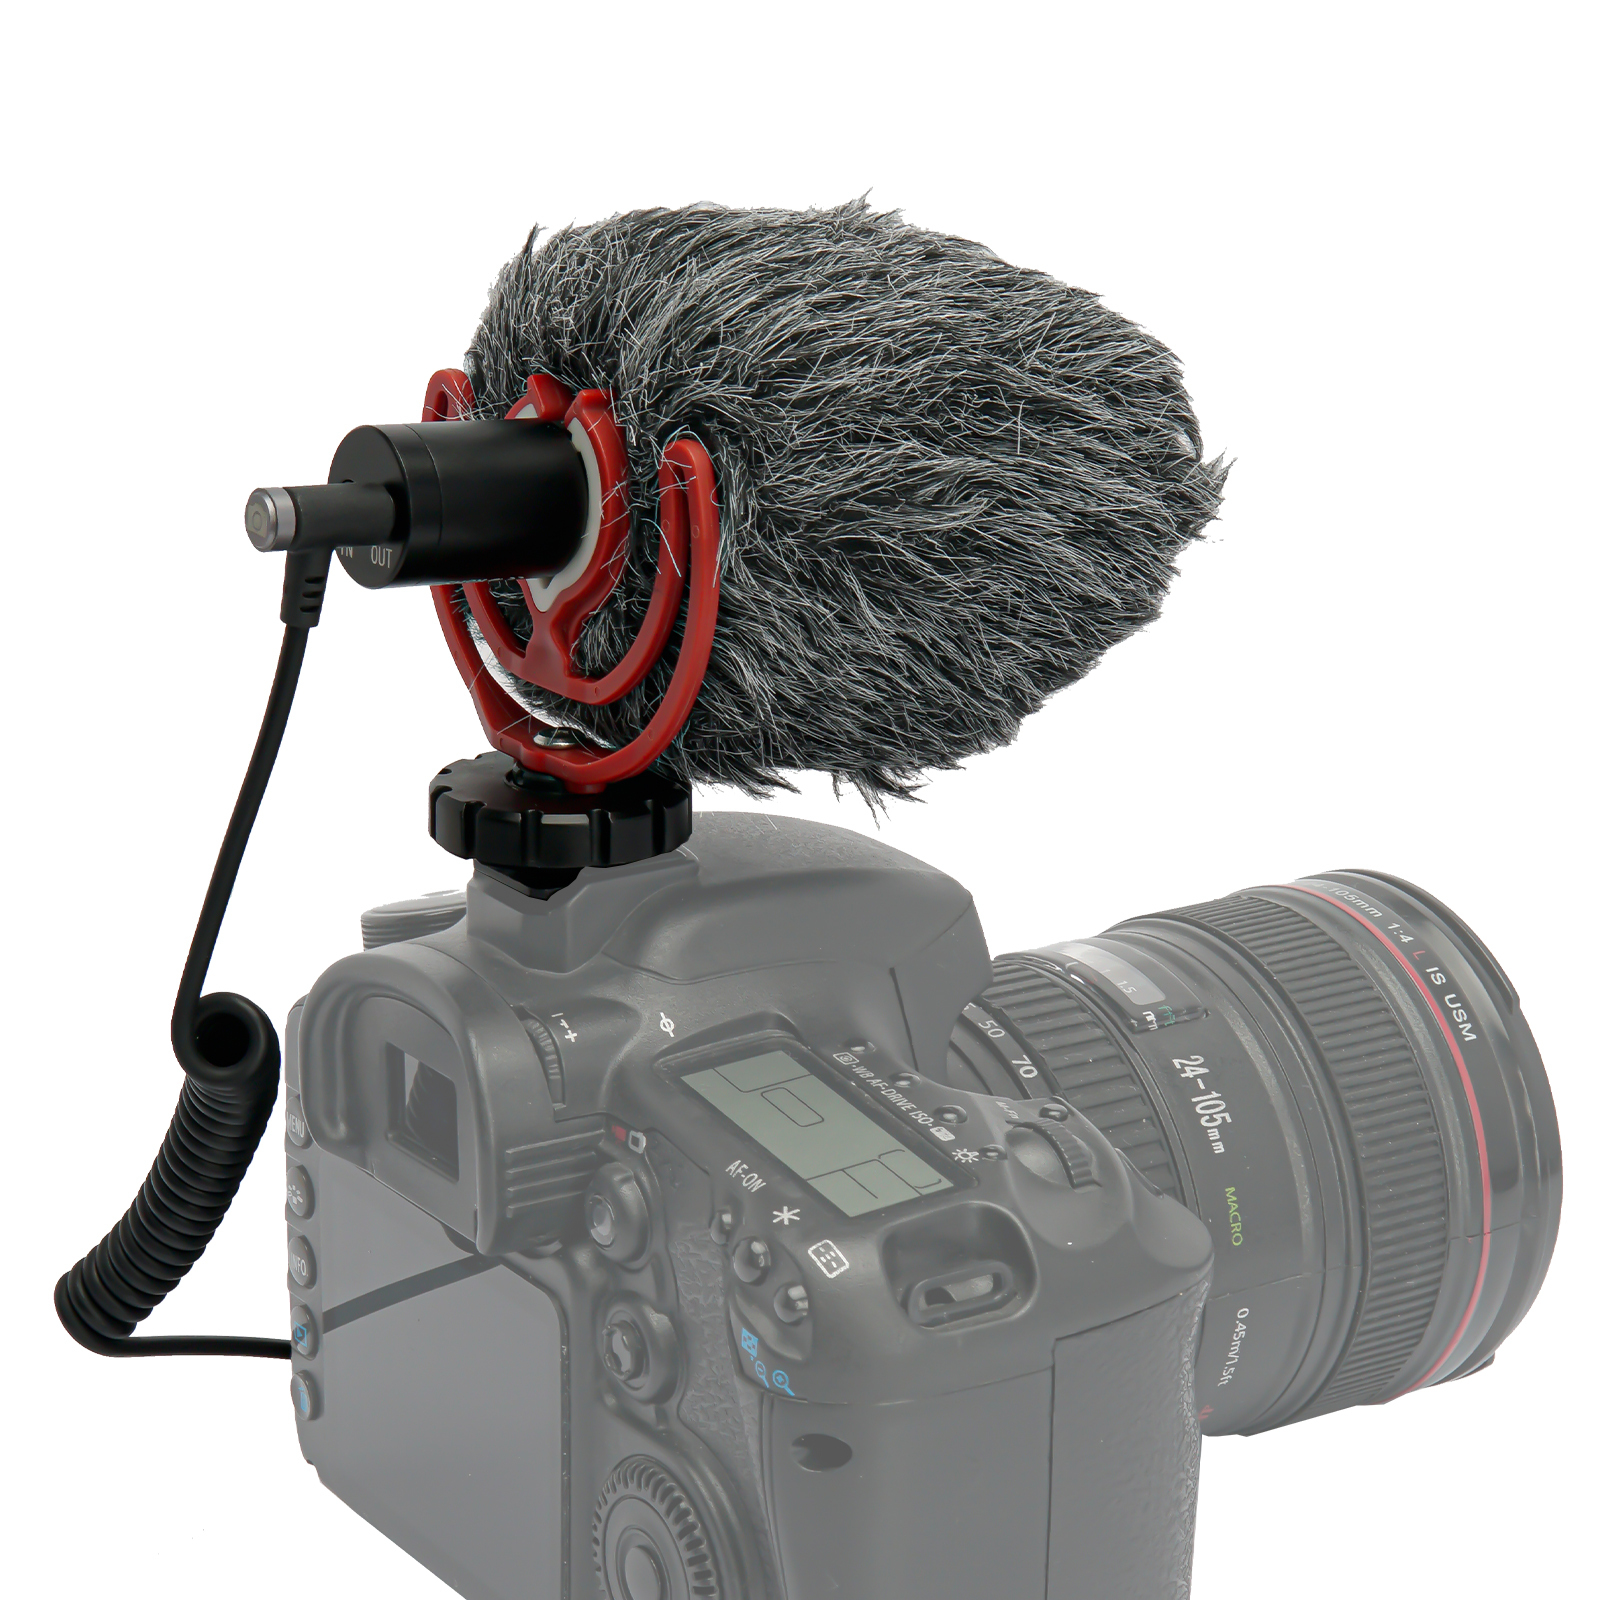 ANDYCINE M1 Pro Video Microphone Compact Camera Mount Shotgun Mic with  Input/Output Jack Allow 2nd Audio Source Compatible for DSLR Camera,Phone,Action  Camera with Furry Windshield